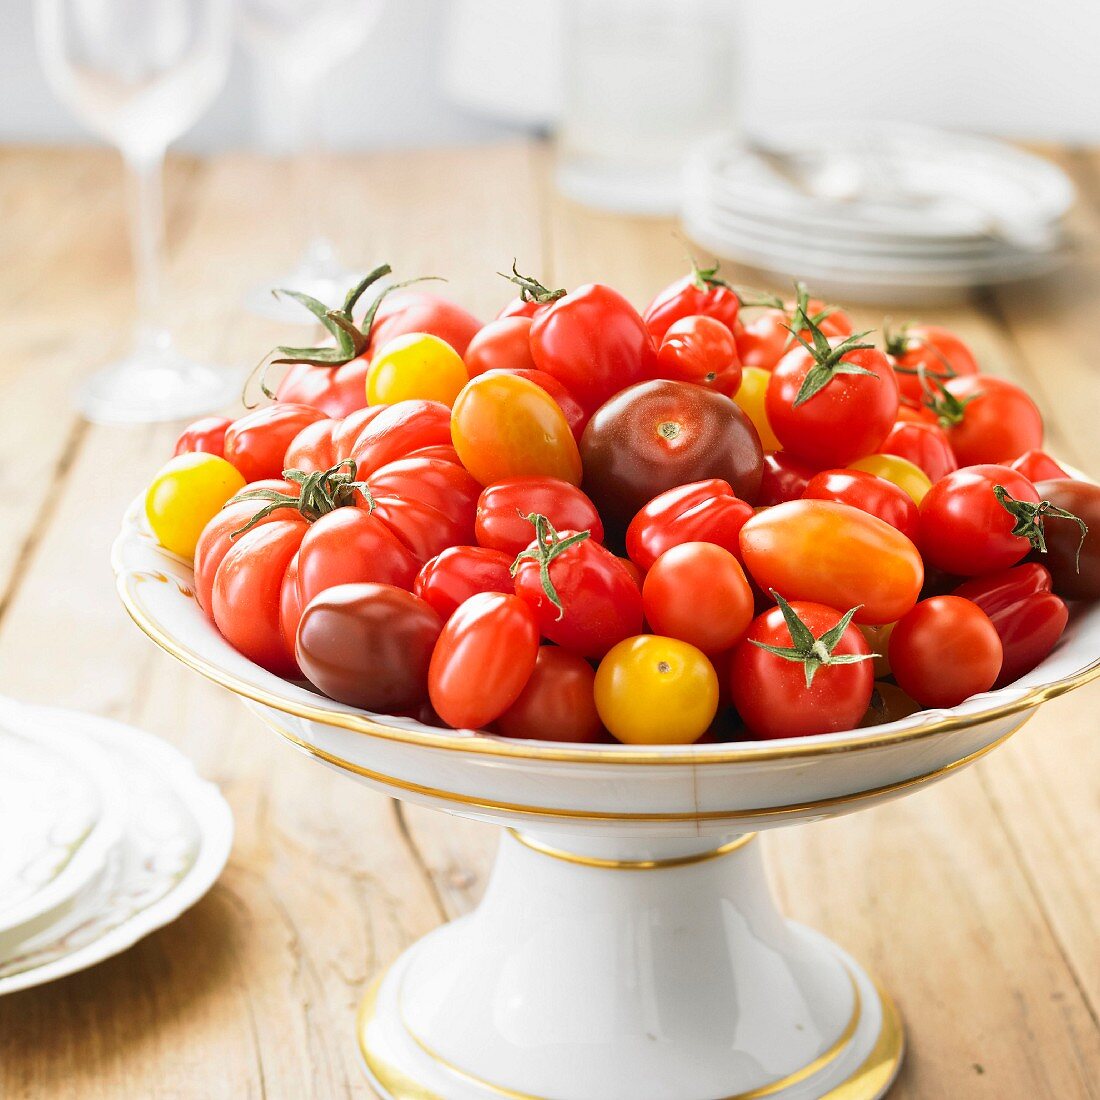 Variety of tomatoes on a presentation dish